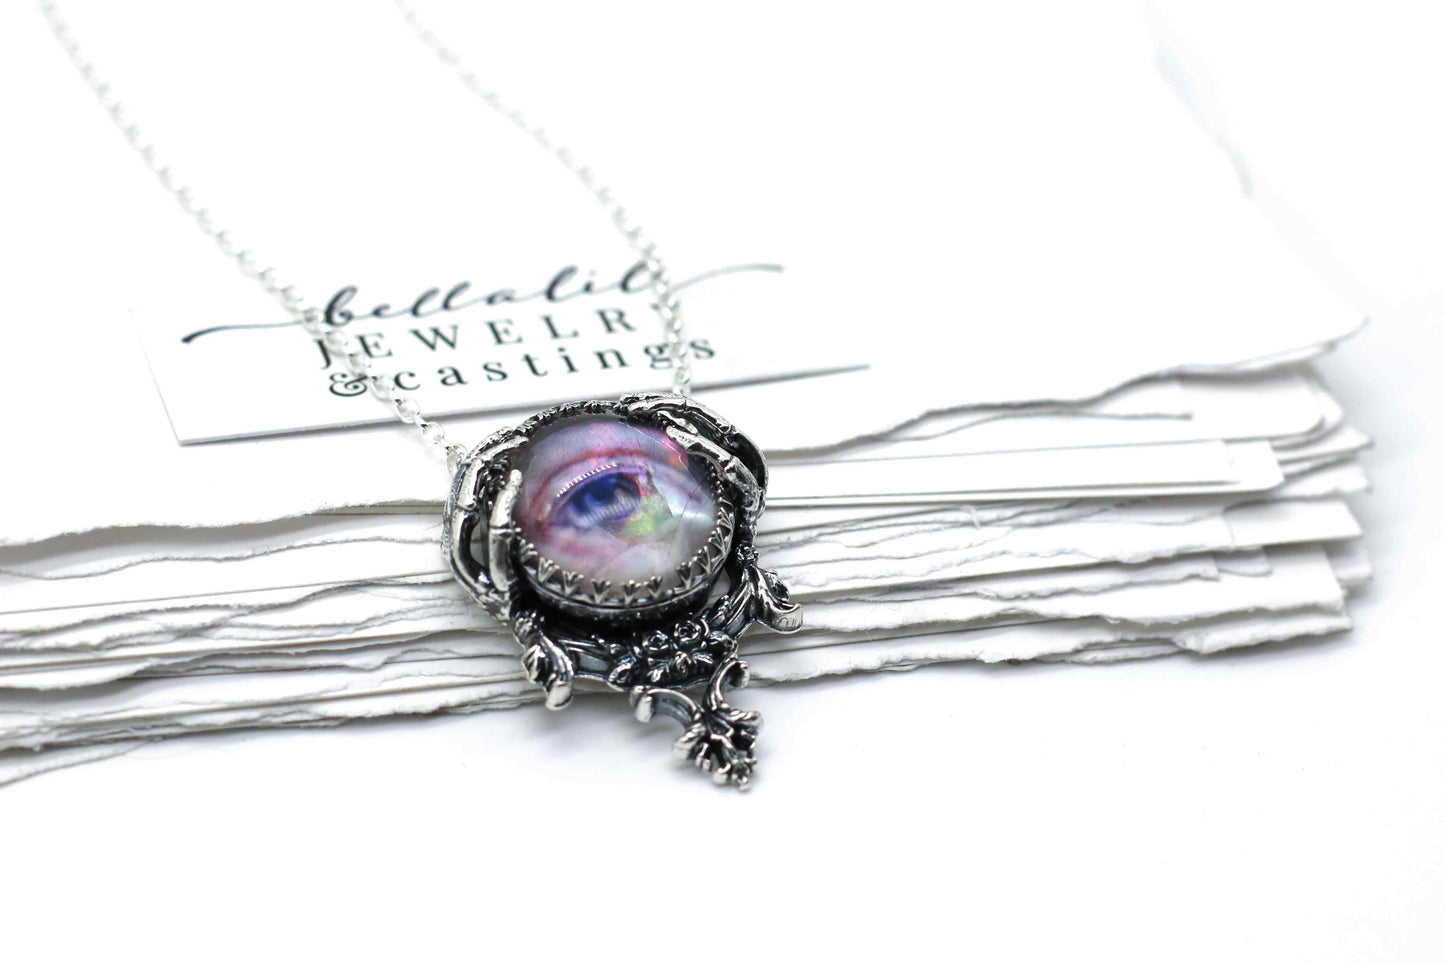 Lover's Eye, "Sinister" Antique reproduction Sterling silver Necklace